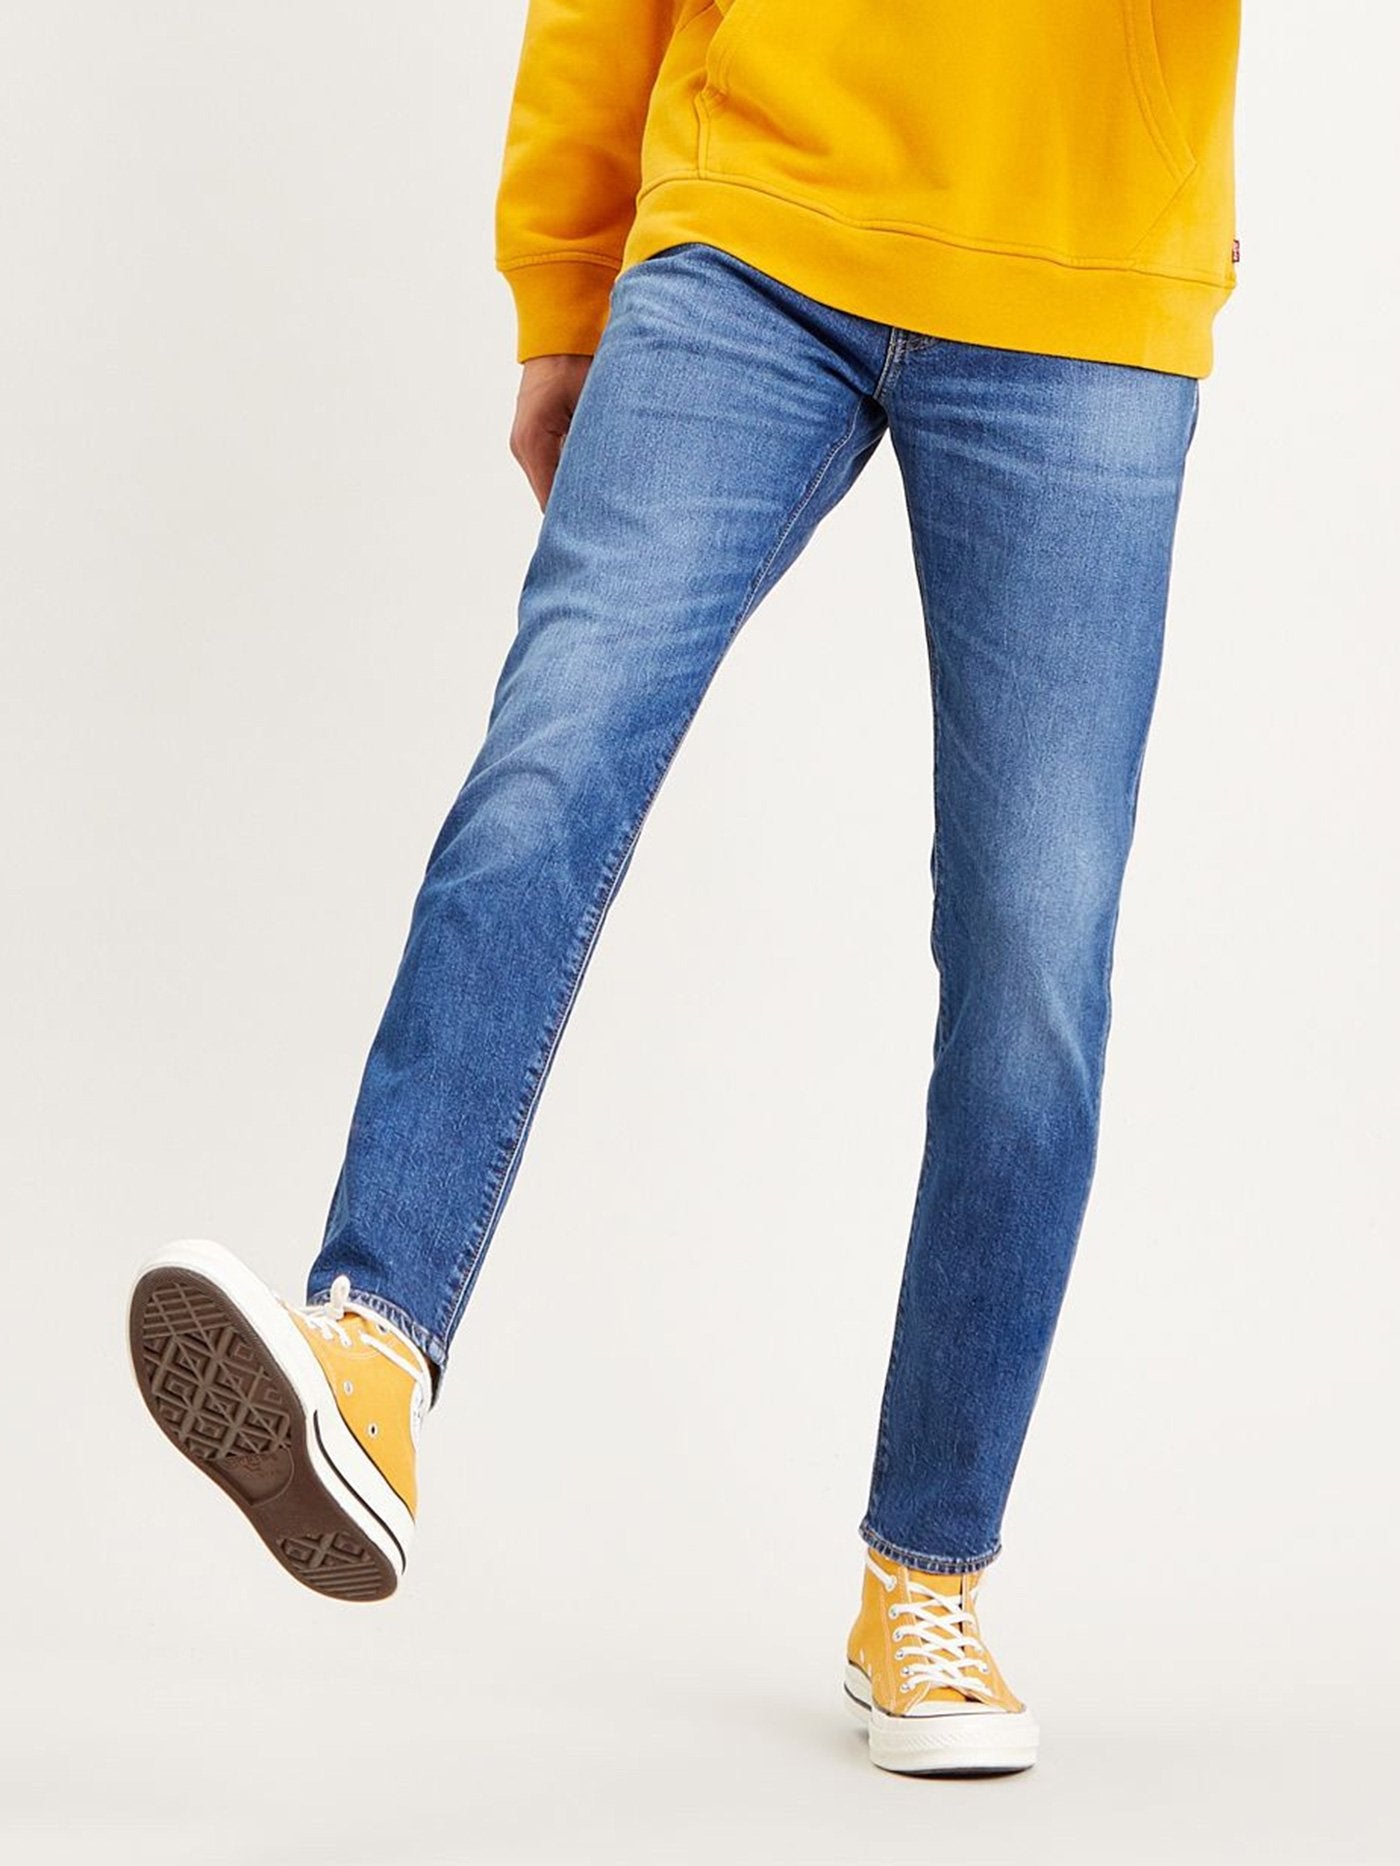 Levis 512 Slim Tapered Fit Jeans | EMPIRE